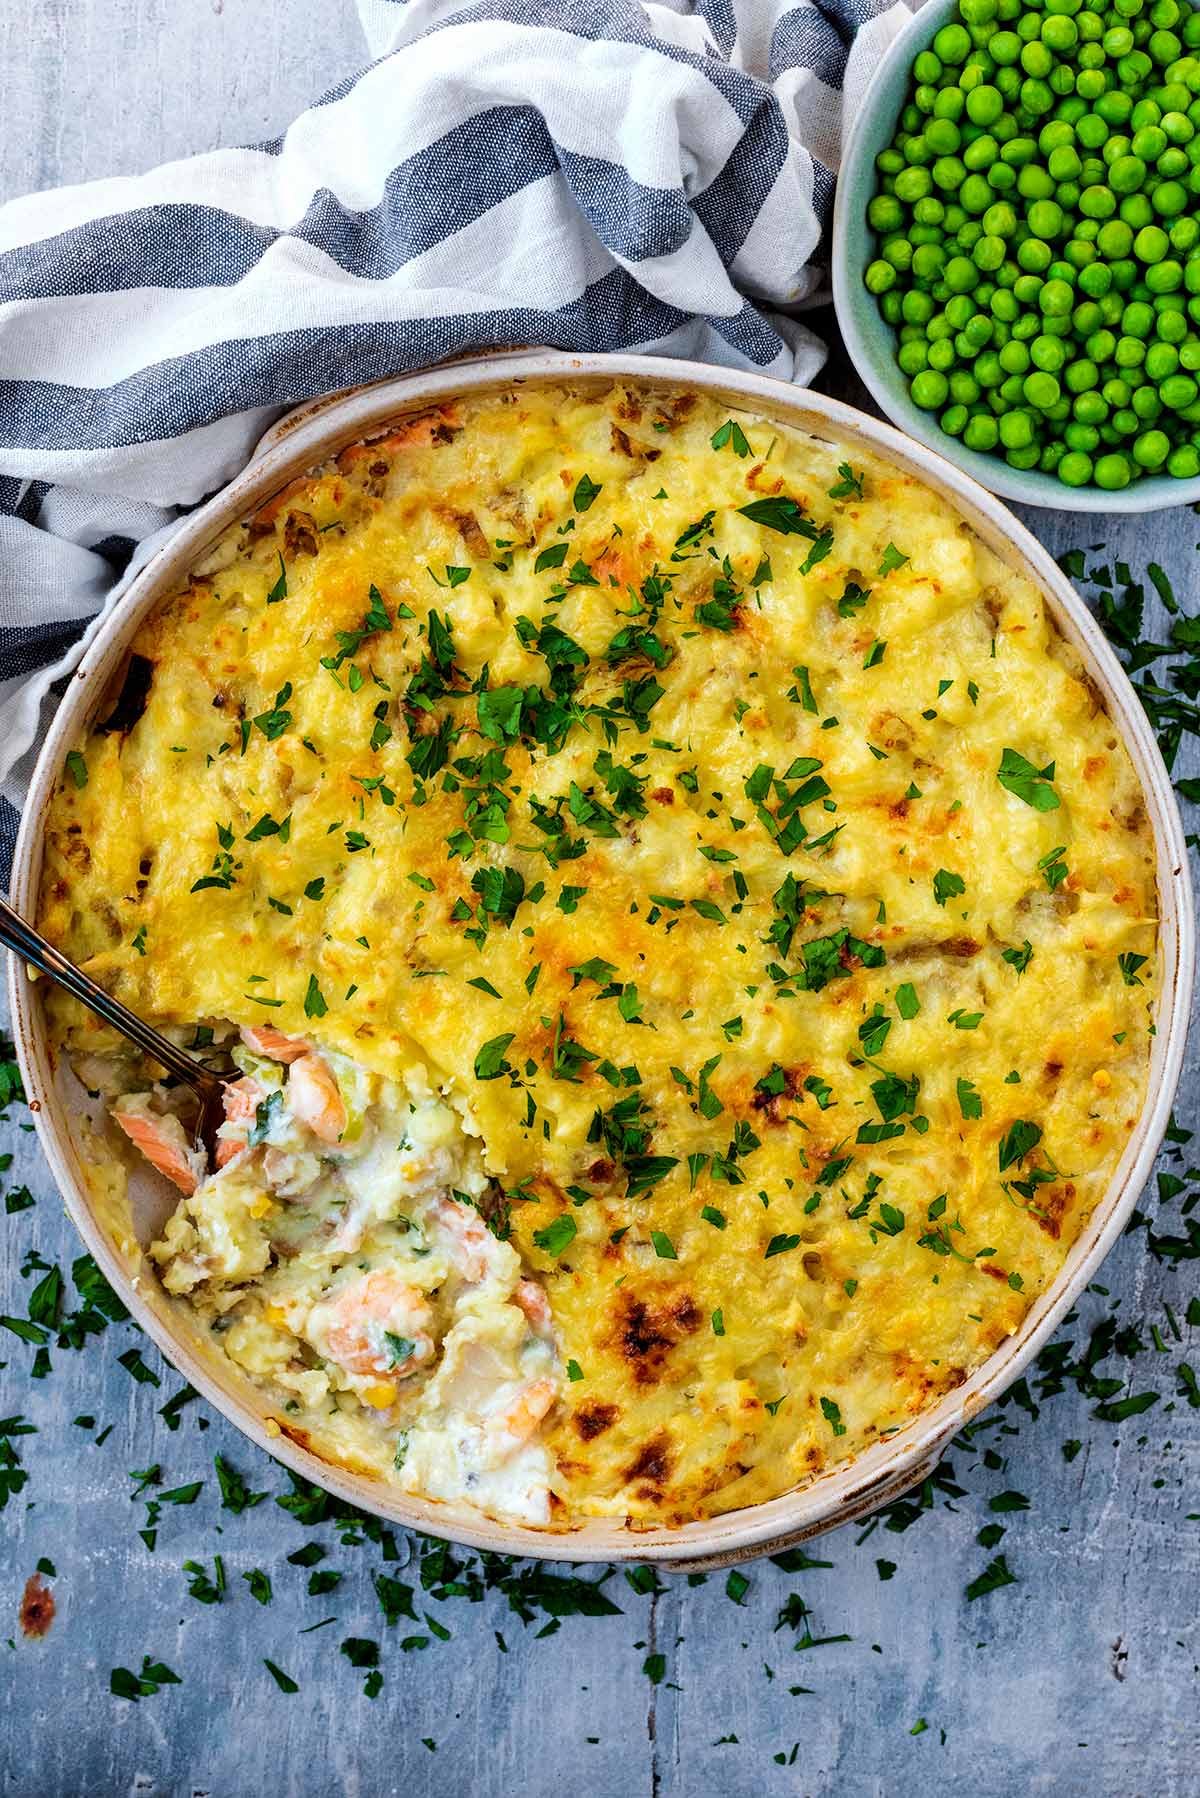 A large dish containing fish pie next to a bowl of peas.